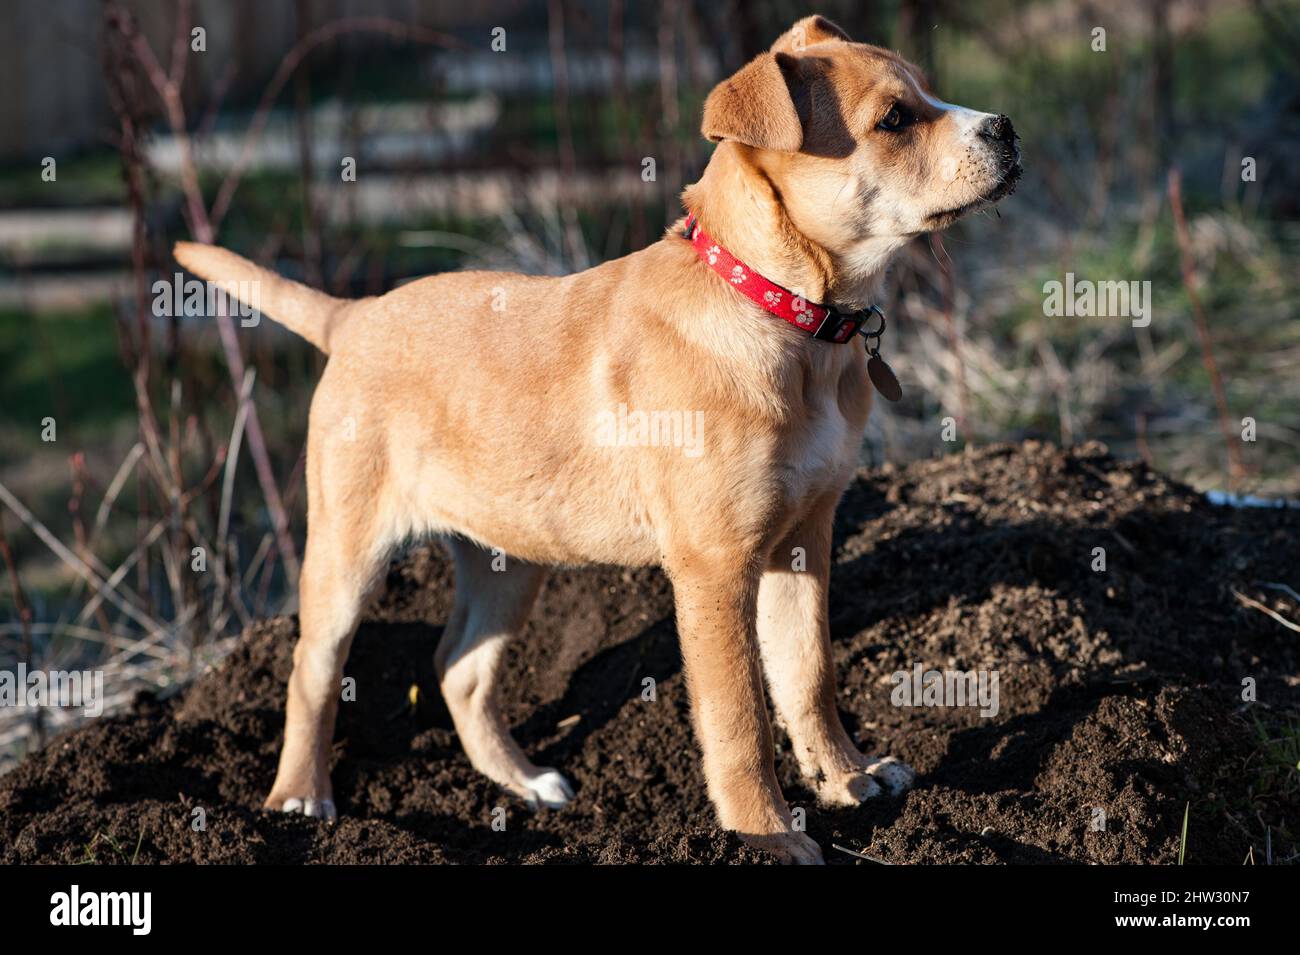 A puppy plays in the dirt Stock Photo